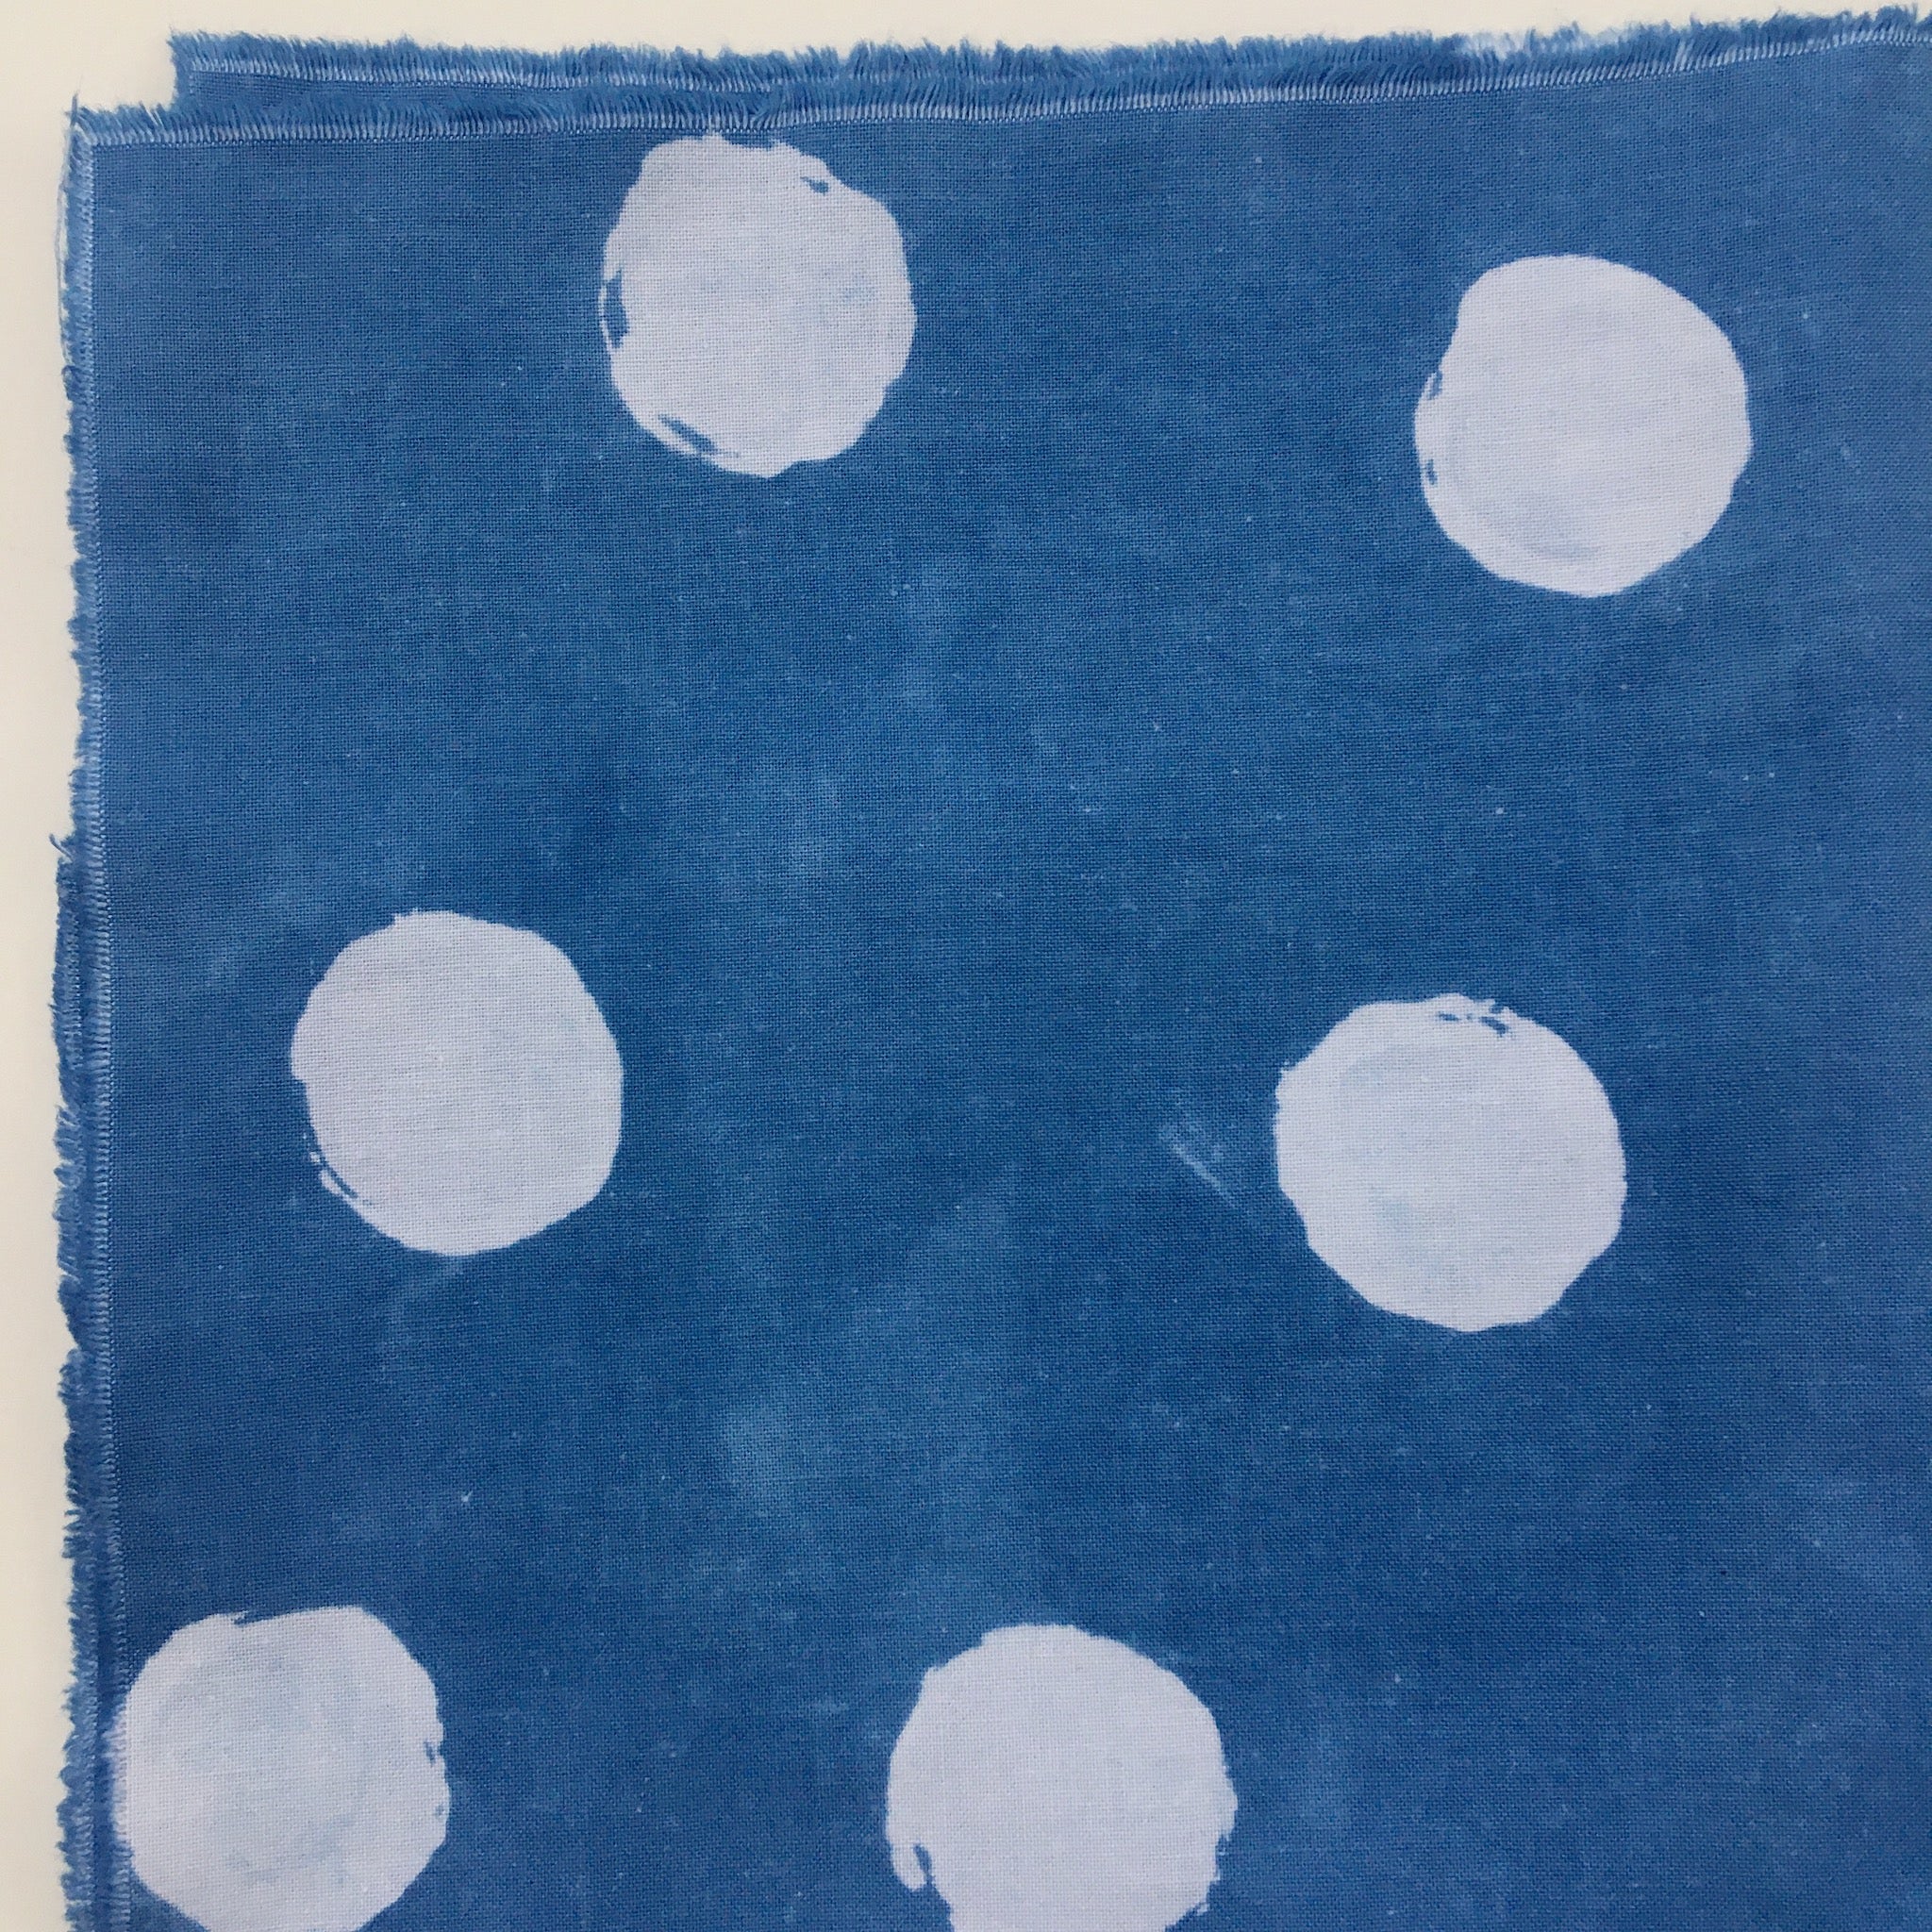 Fabric example dyed with clay resist: deep indigo blue with large white polka dots